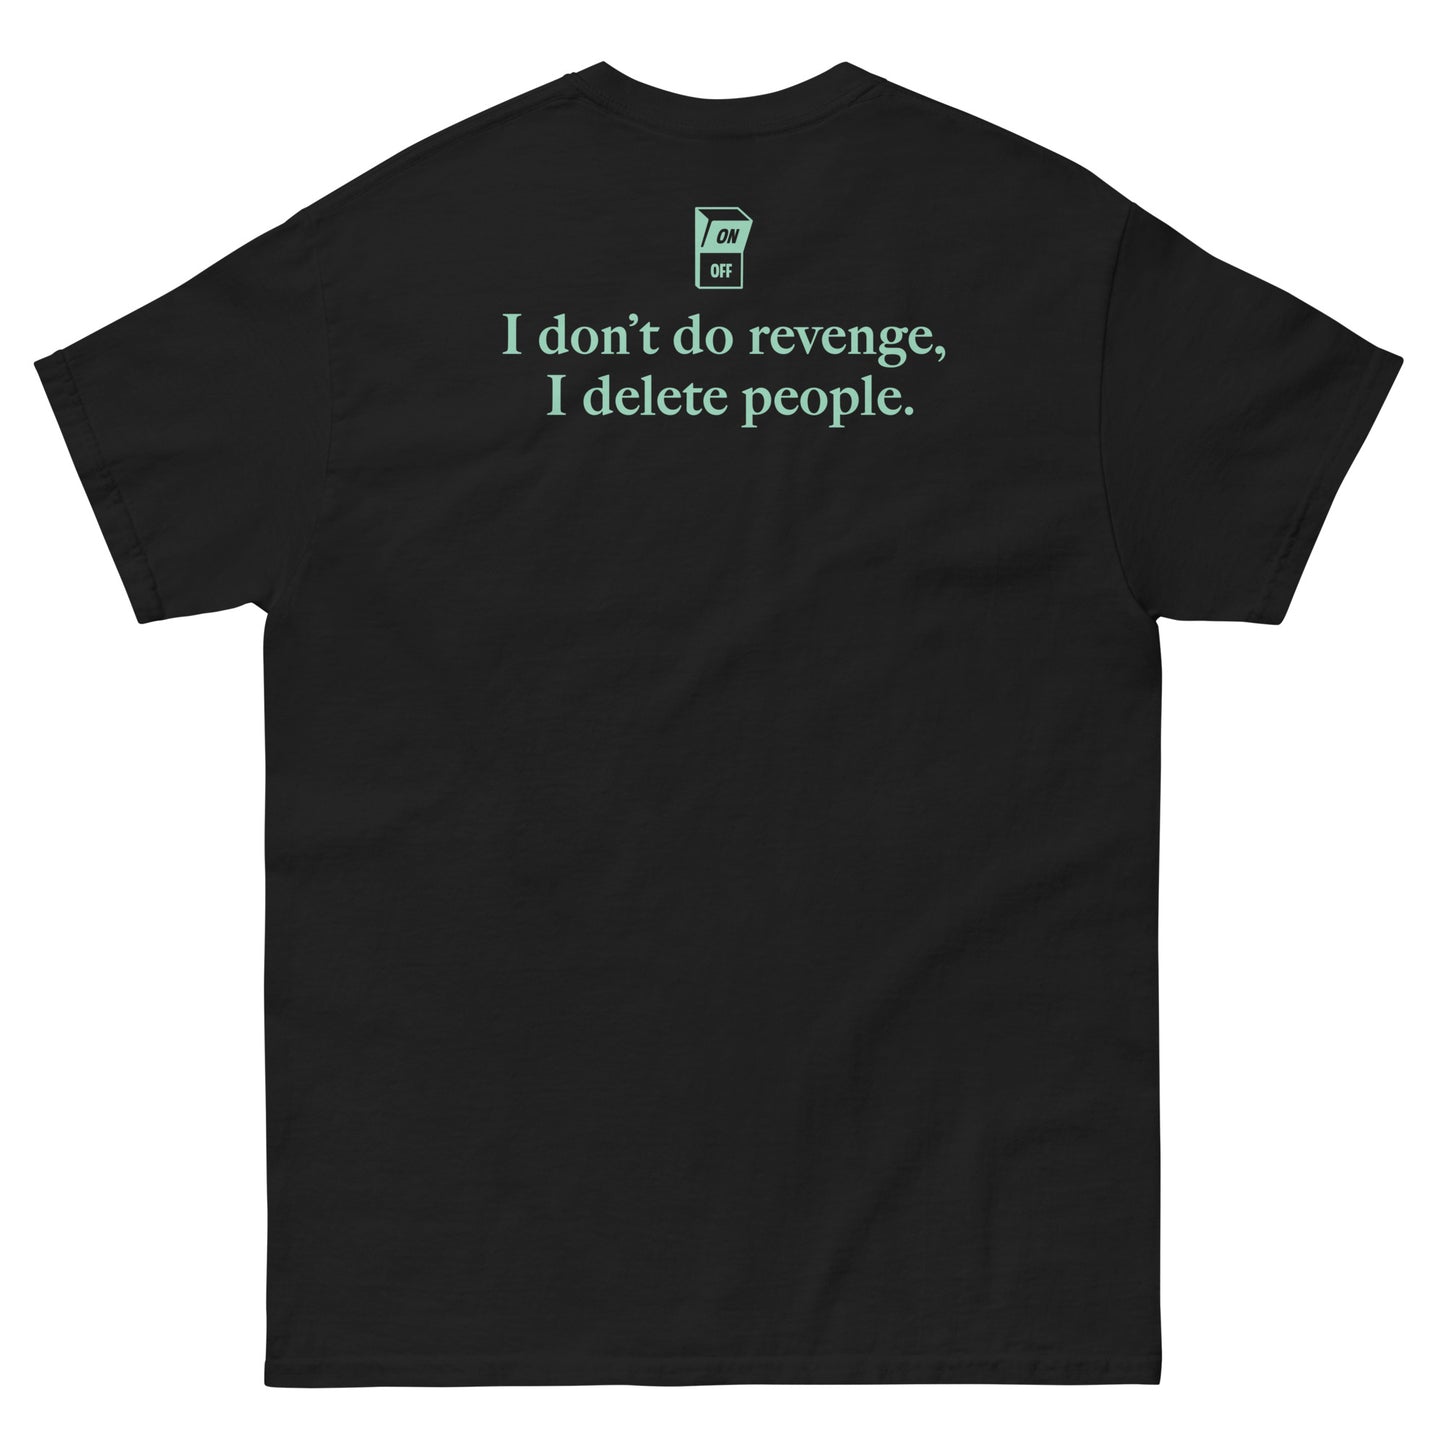 Black High Quality Tee - Front Design with "I don't do revenge, I delete people. " print on left chest - Back Design with a Phrase "I don't do revenge, I delete people." print